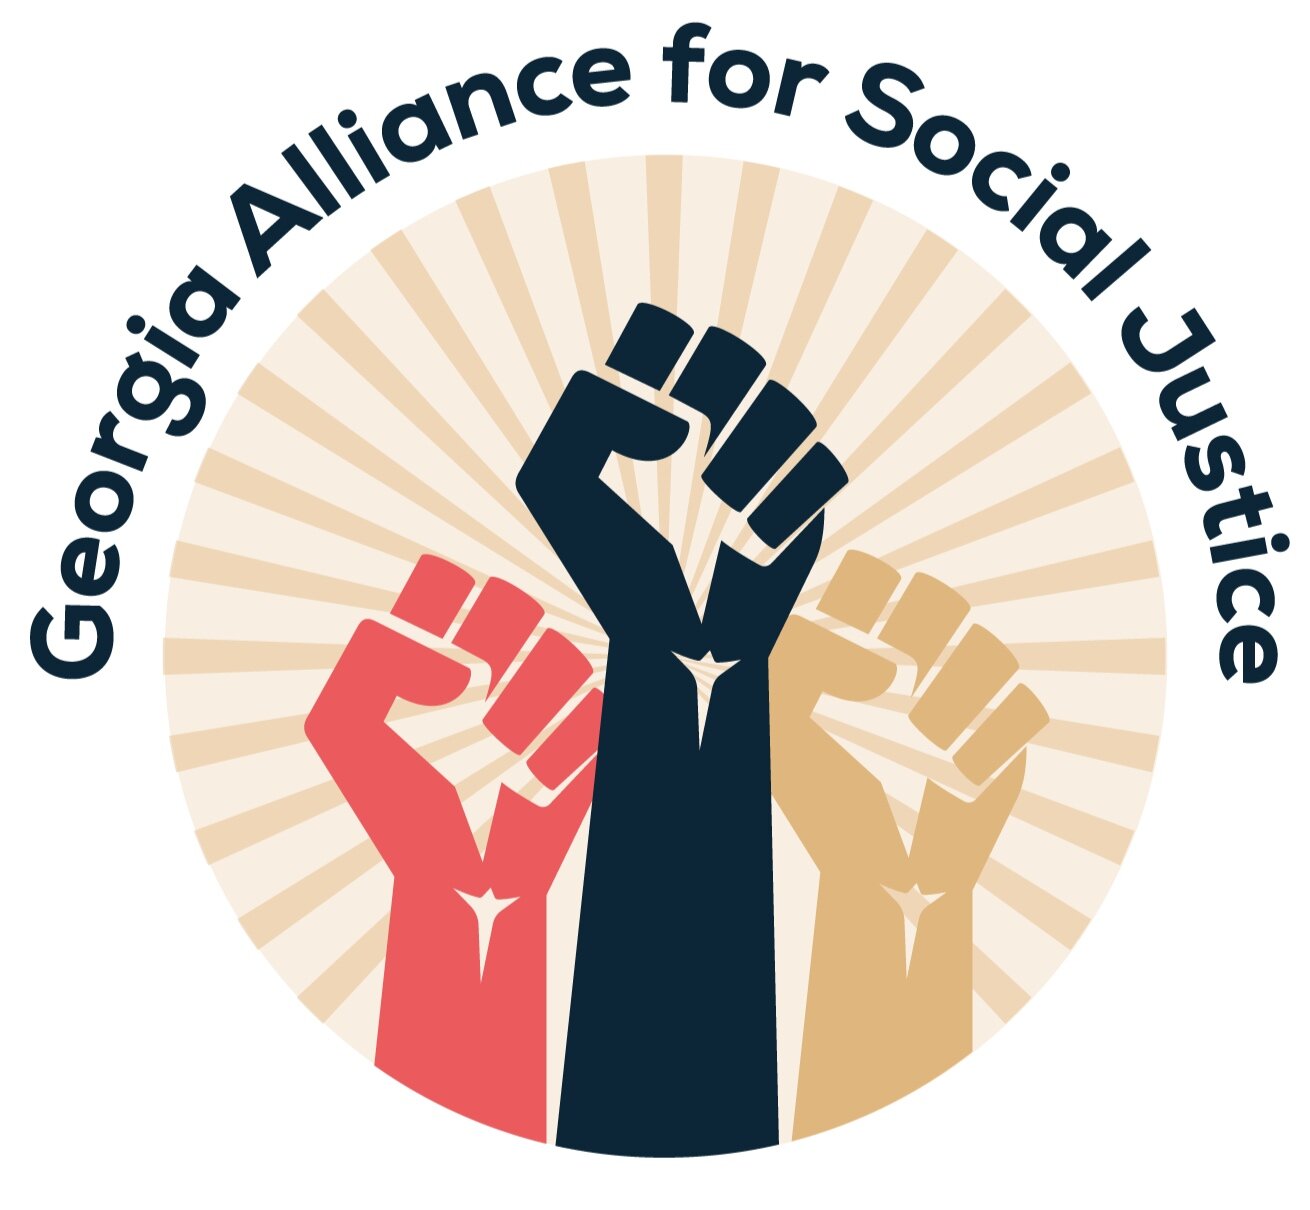 Georgia Alliance for Social Justice